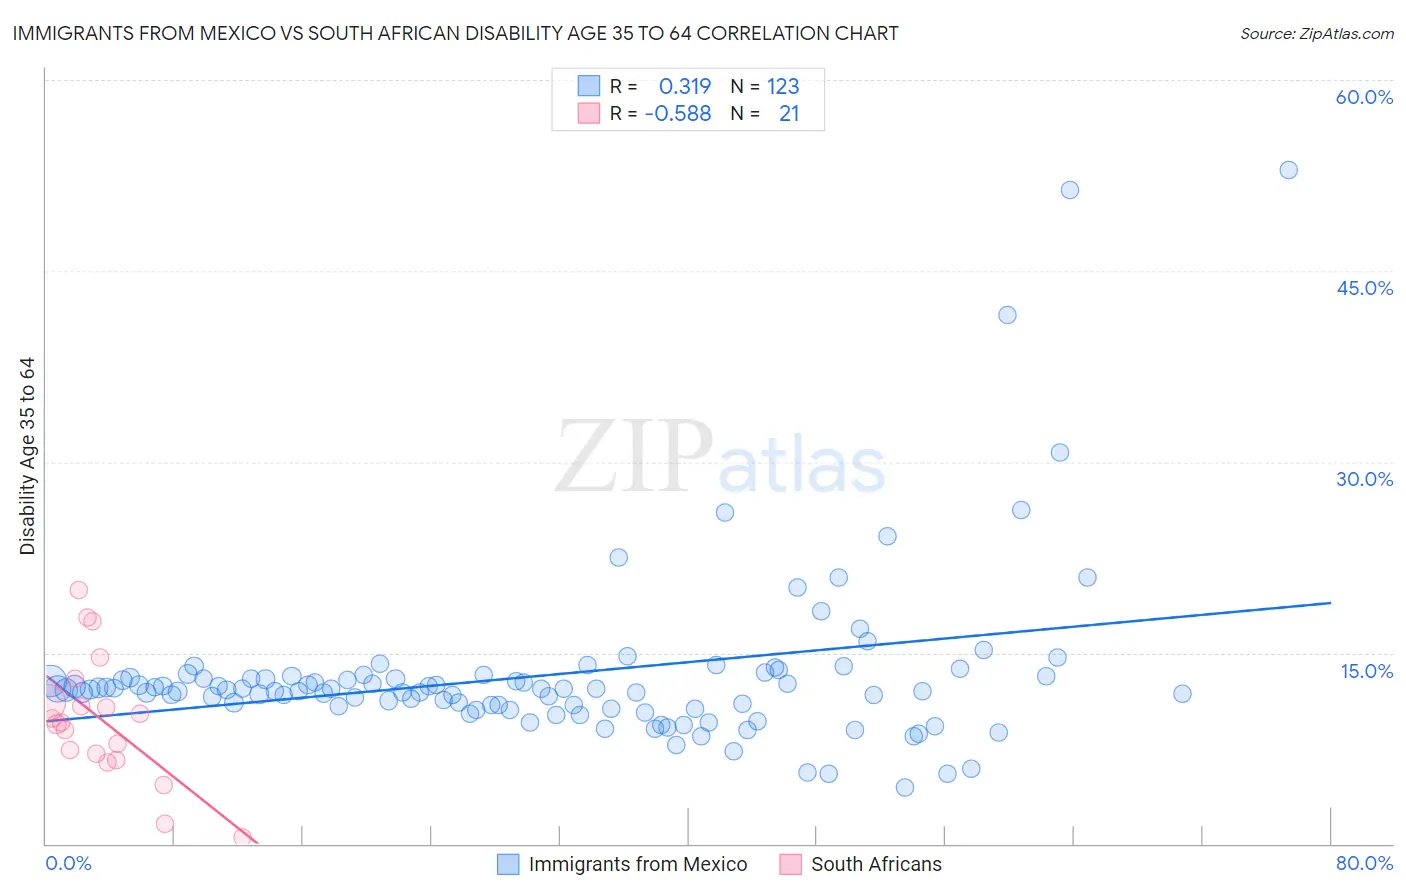 Immigrants from Mexico vs South African Disability Age 35 to 64